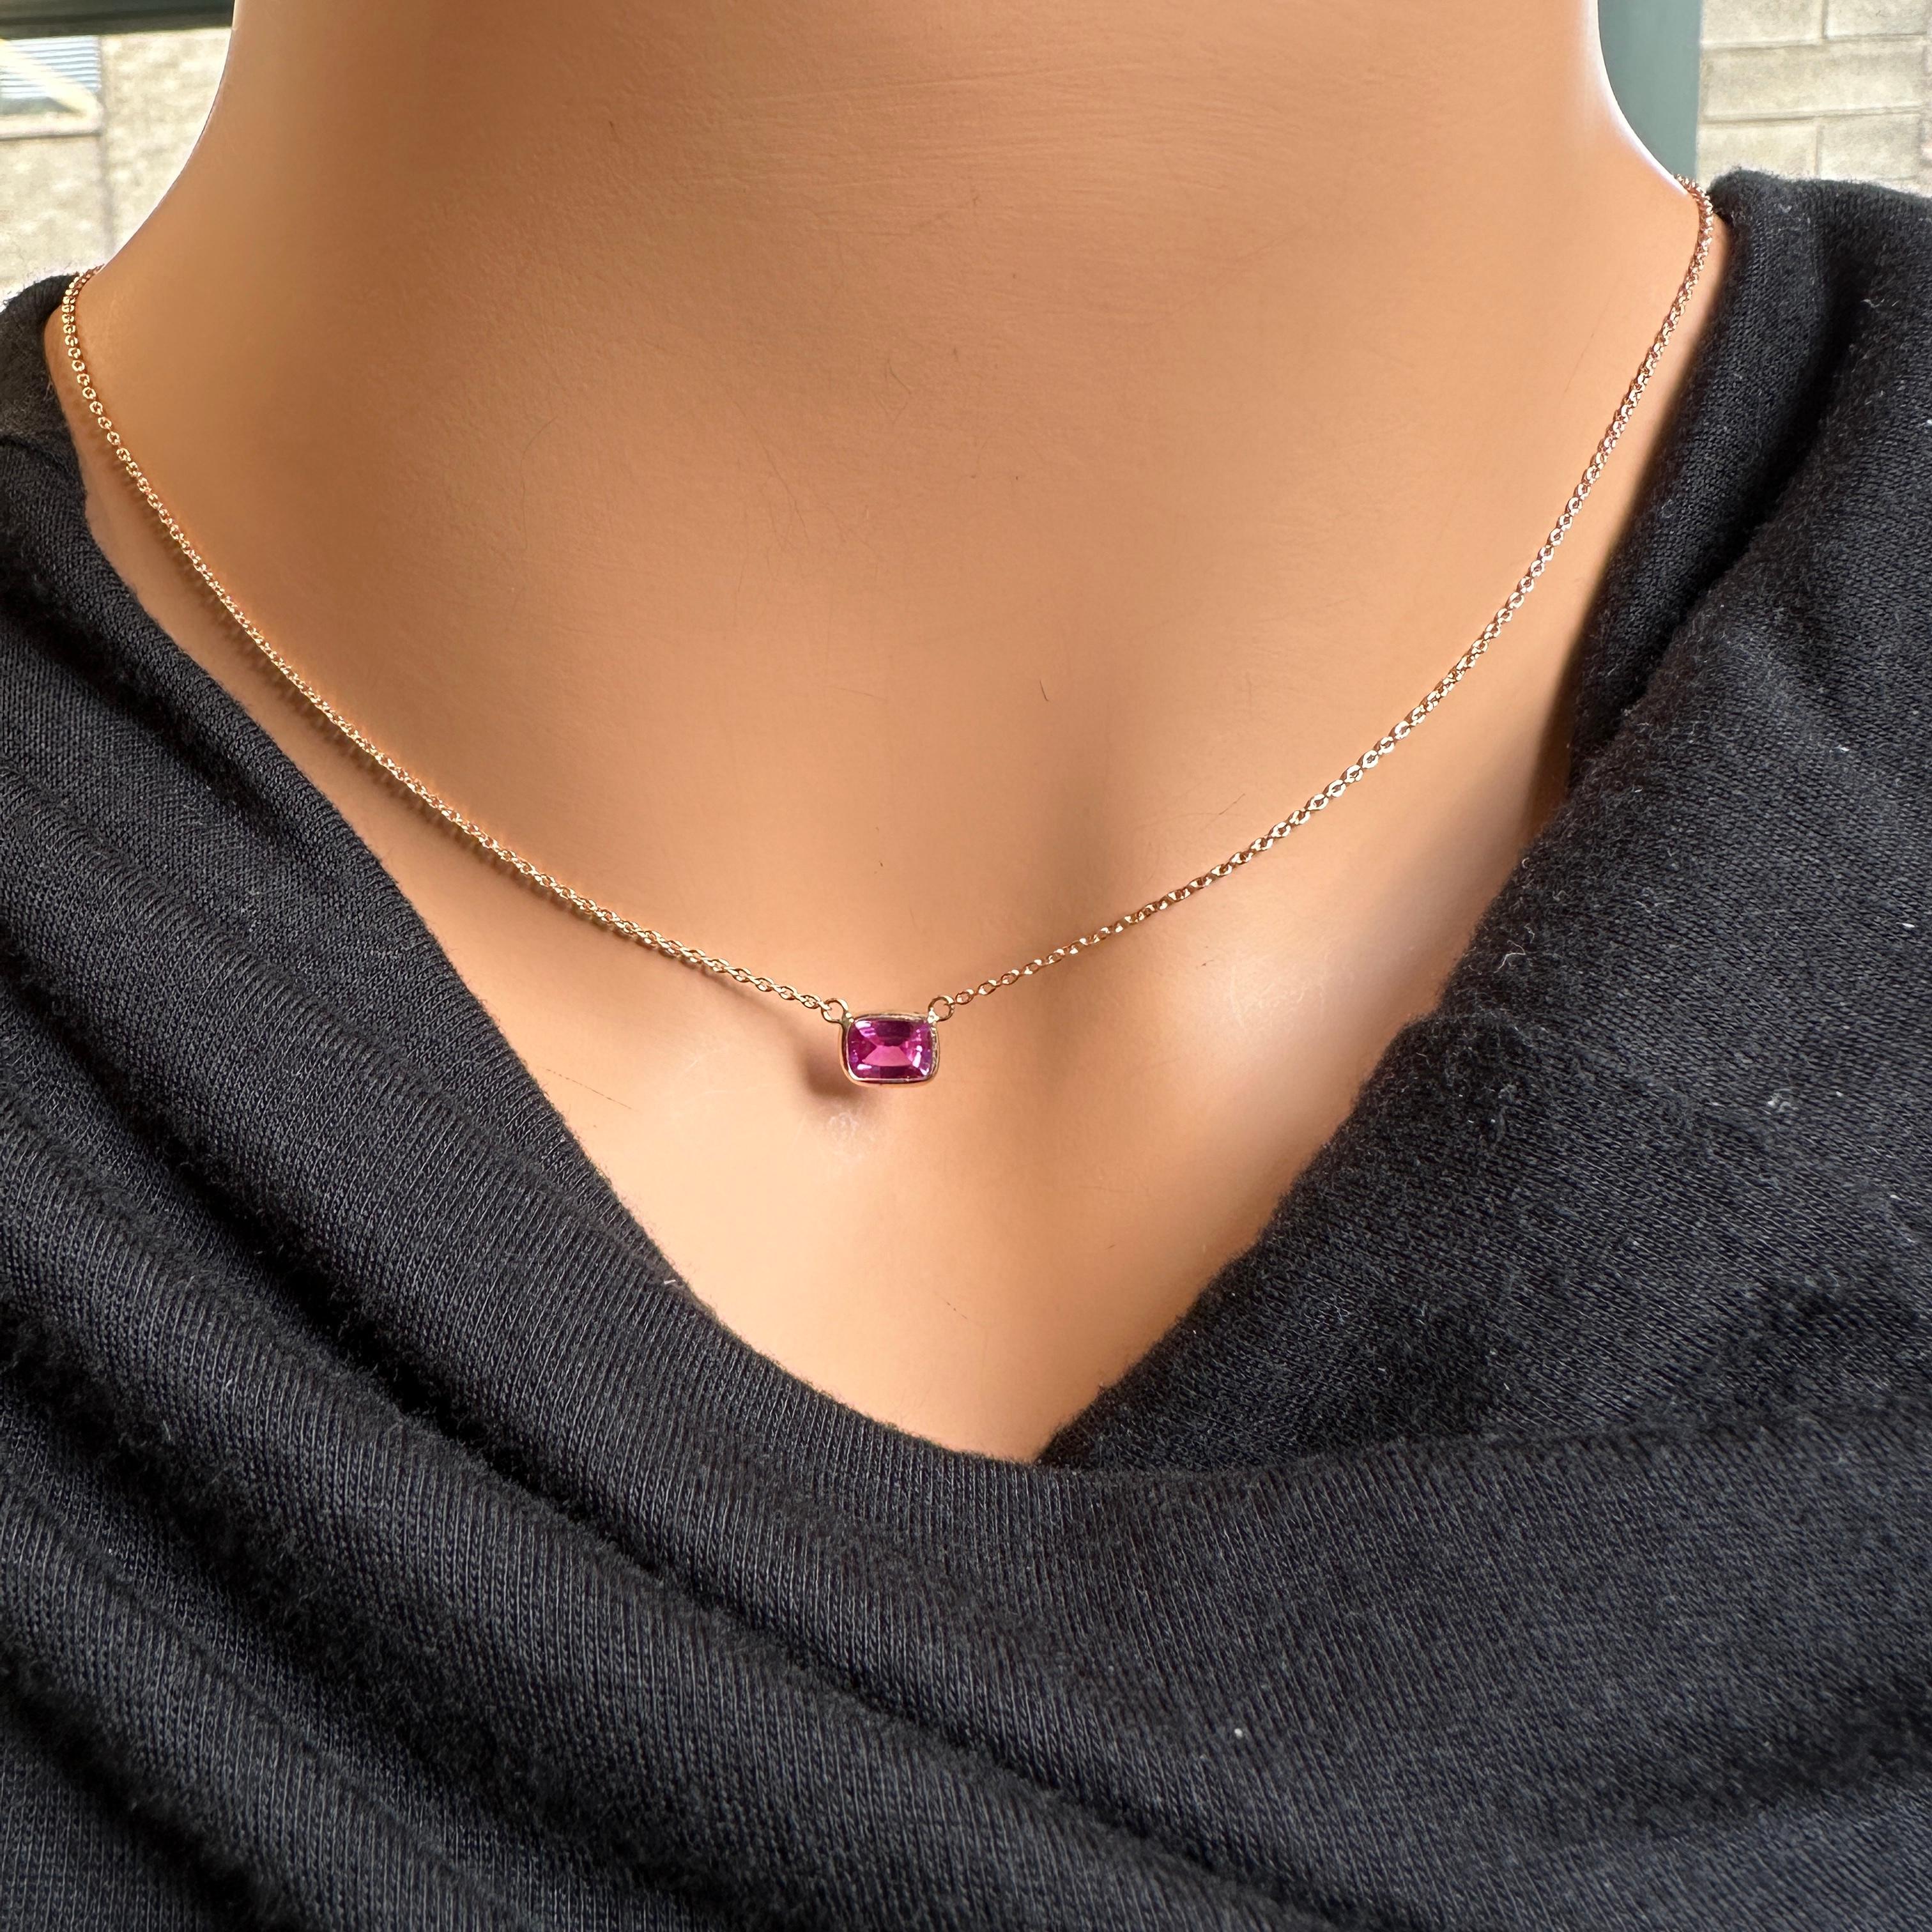 A fashion necklace made of 14k rose gold with a main stone of a cushion-cut pink sapphire weighing 1.21 carats and certified would be a beautiful and elegant choice. Pink sapphires are known for their delicate and romantic color, and the cushion cut